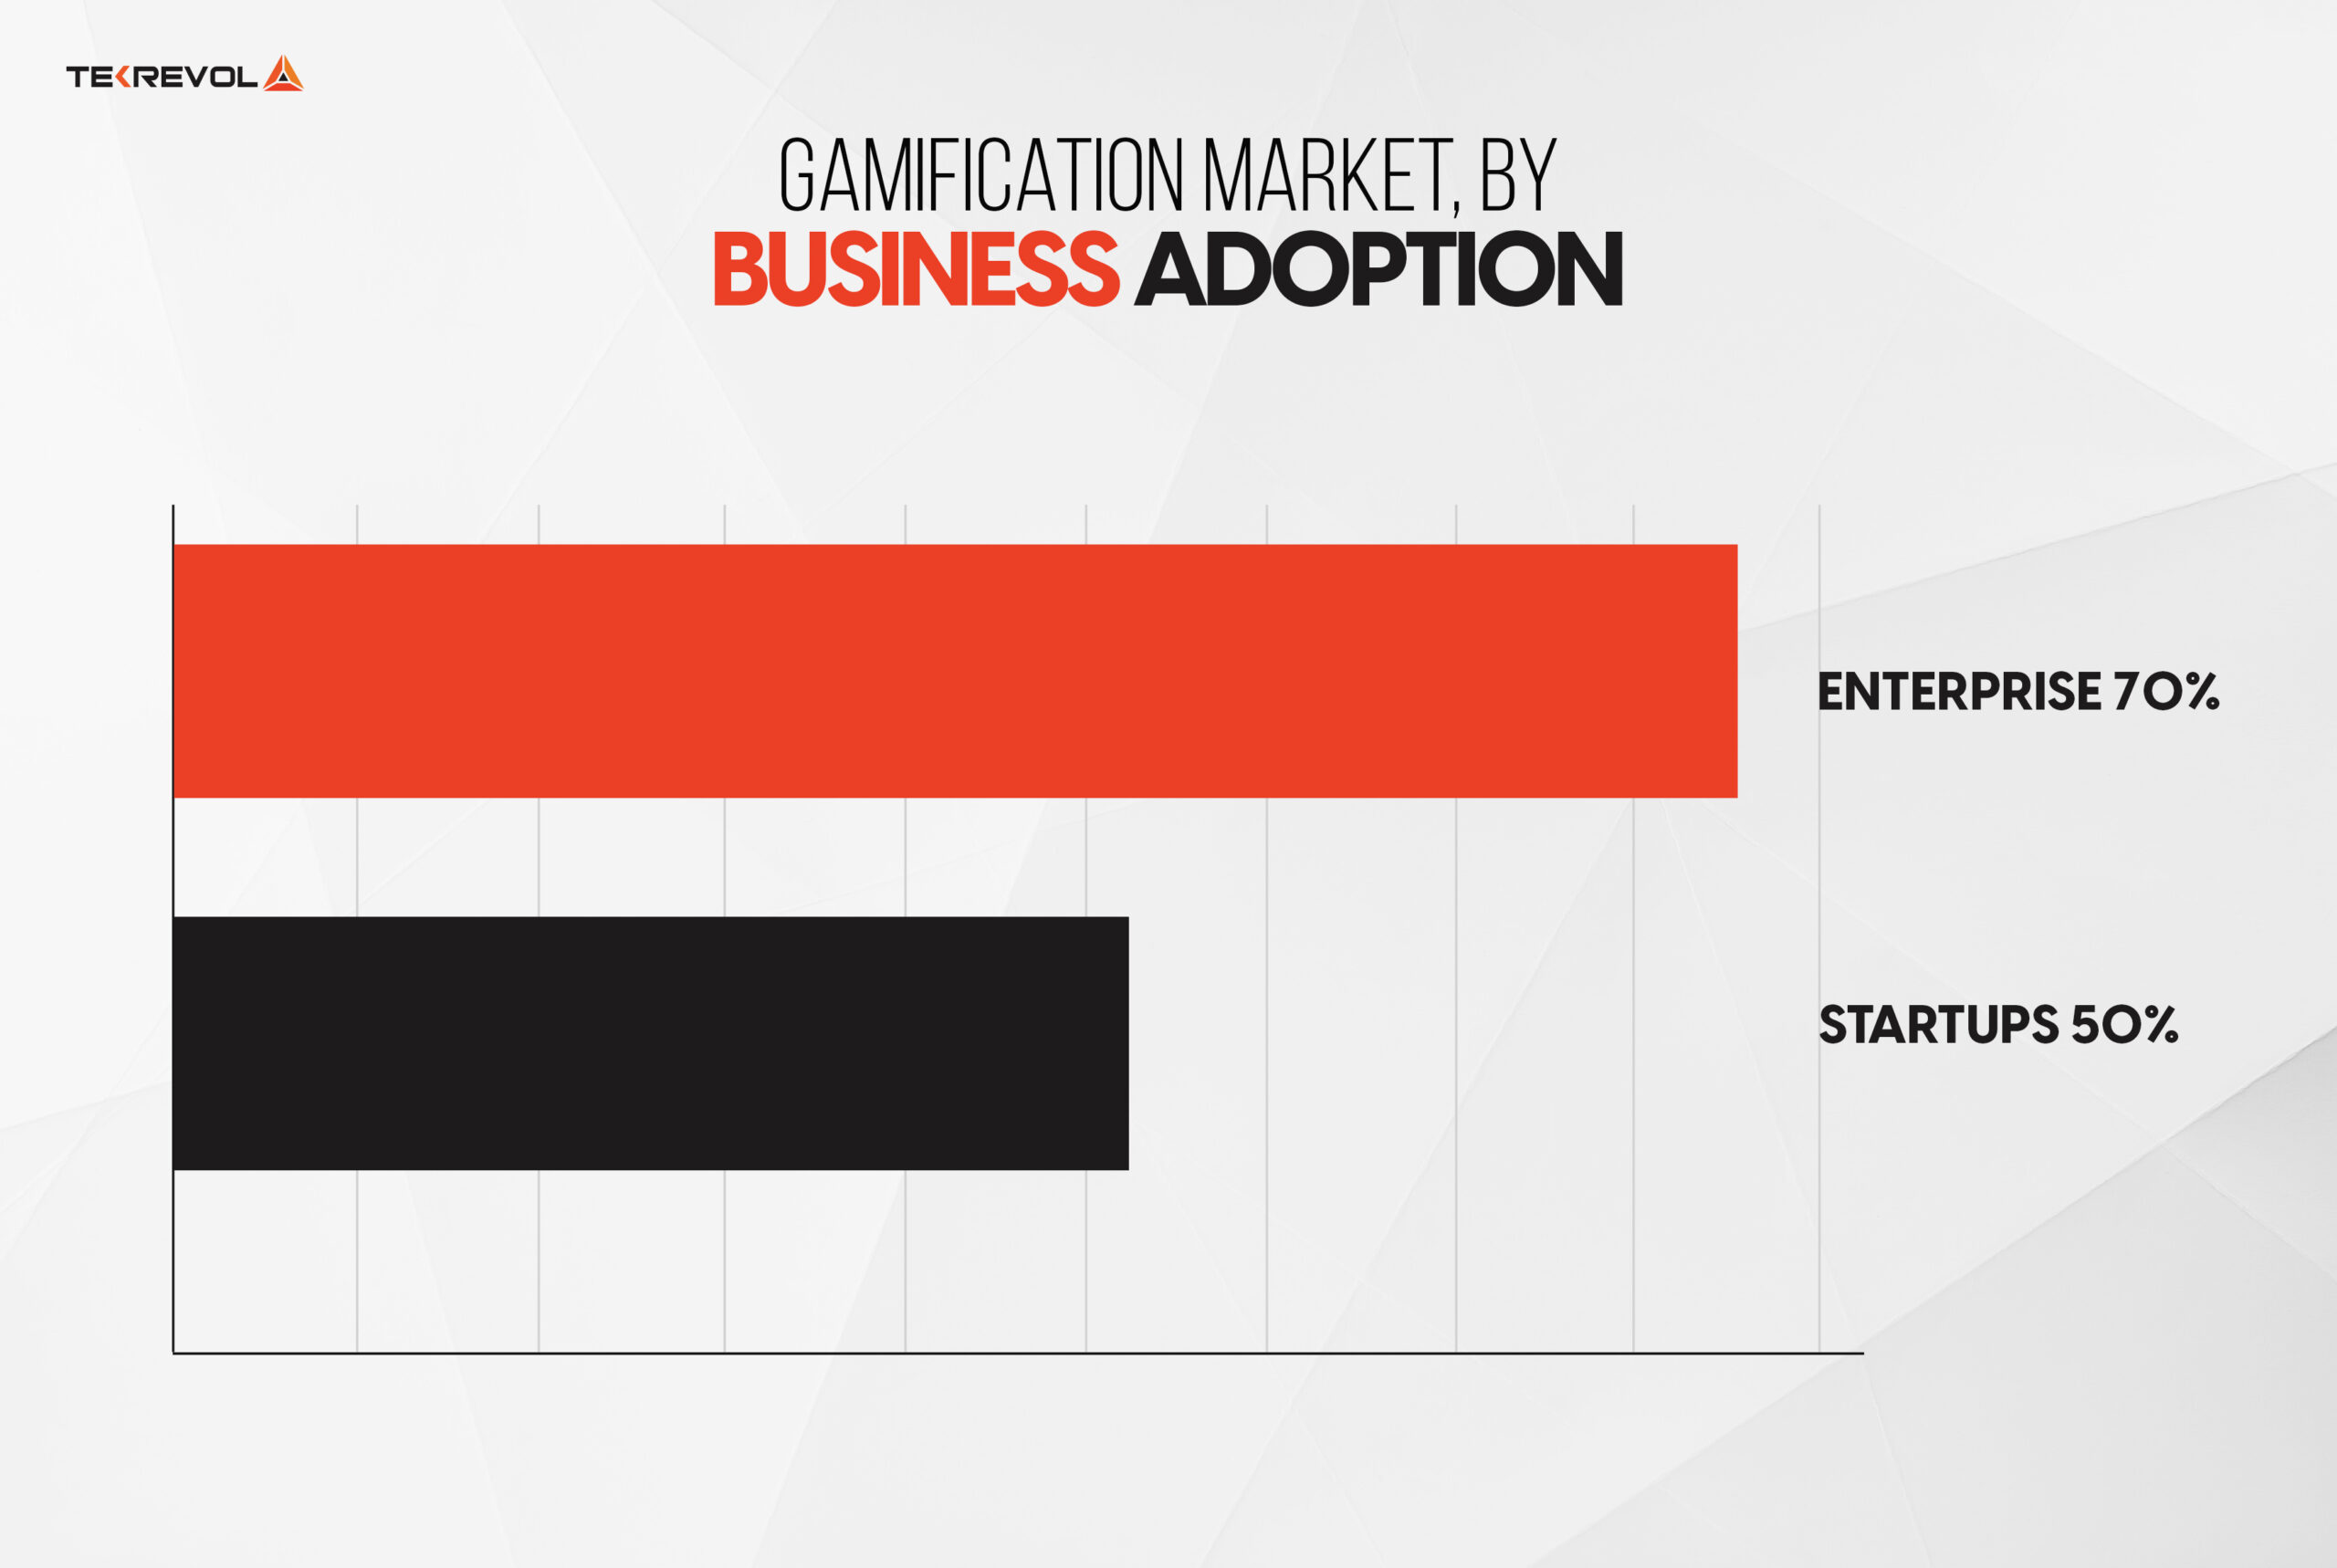 Gamification-market-by-business-adoption